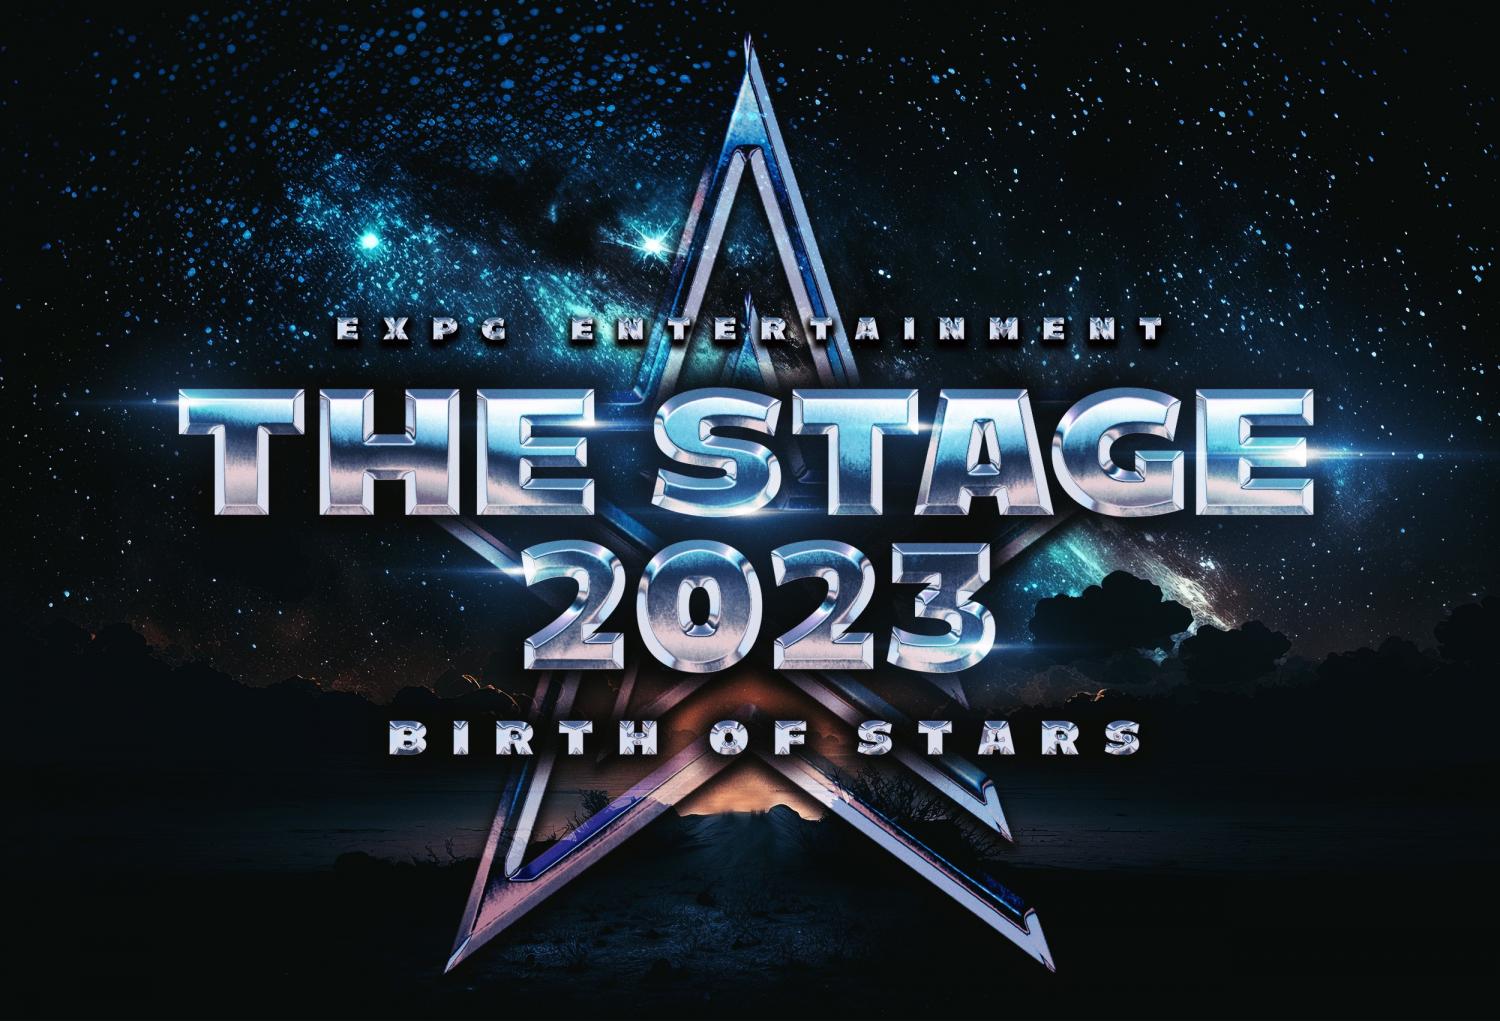 EXPG ENTERTAINMENT THE STAGE 2023～BIRTH OF STARS～